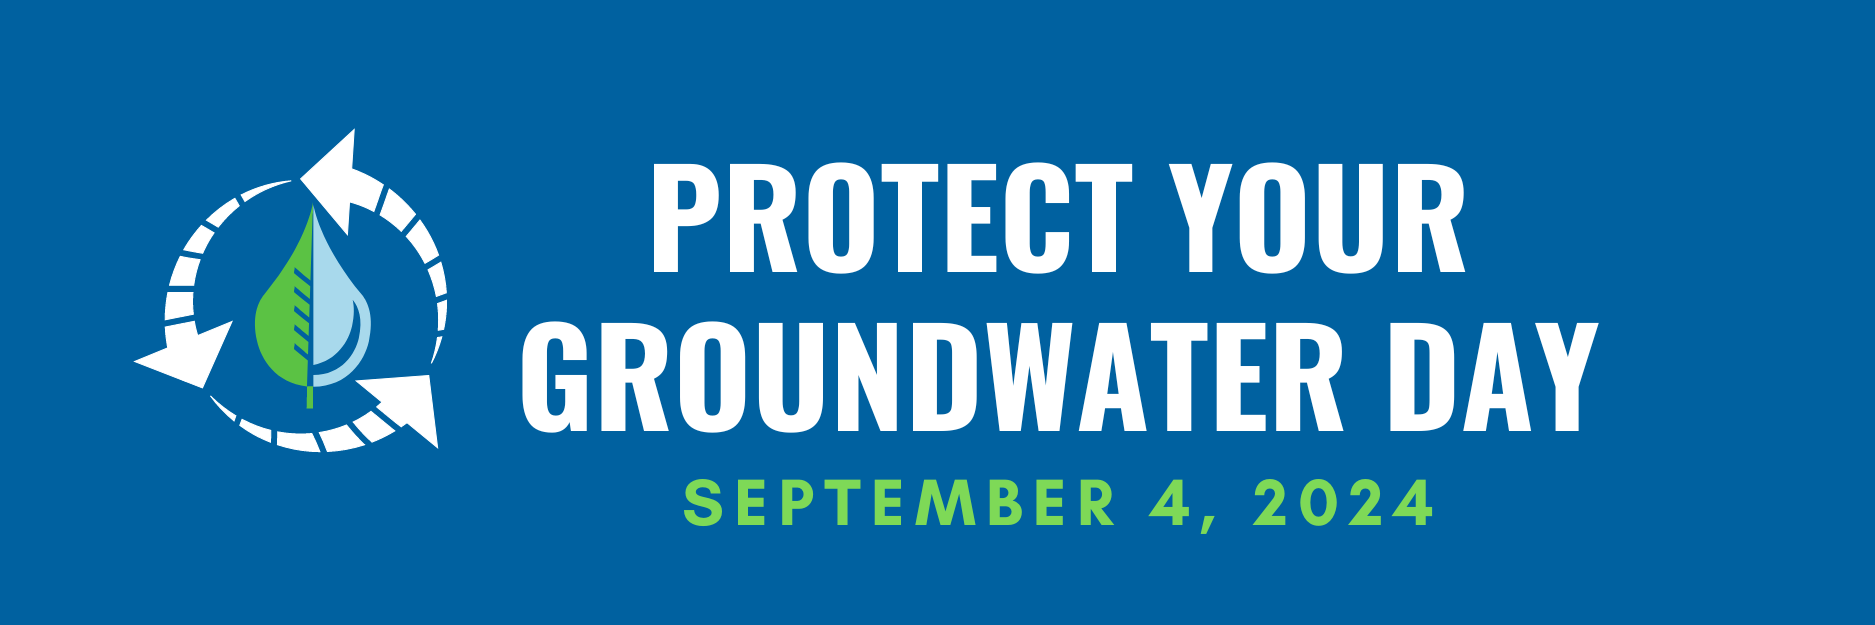 Protect Your Groundwater Day 2024